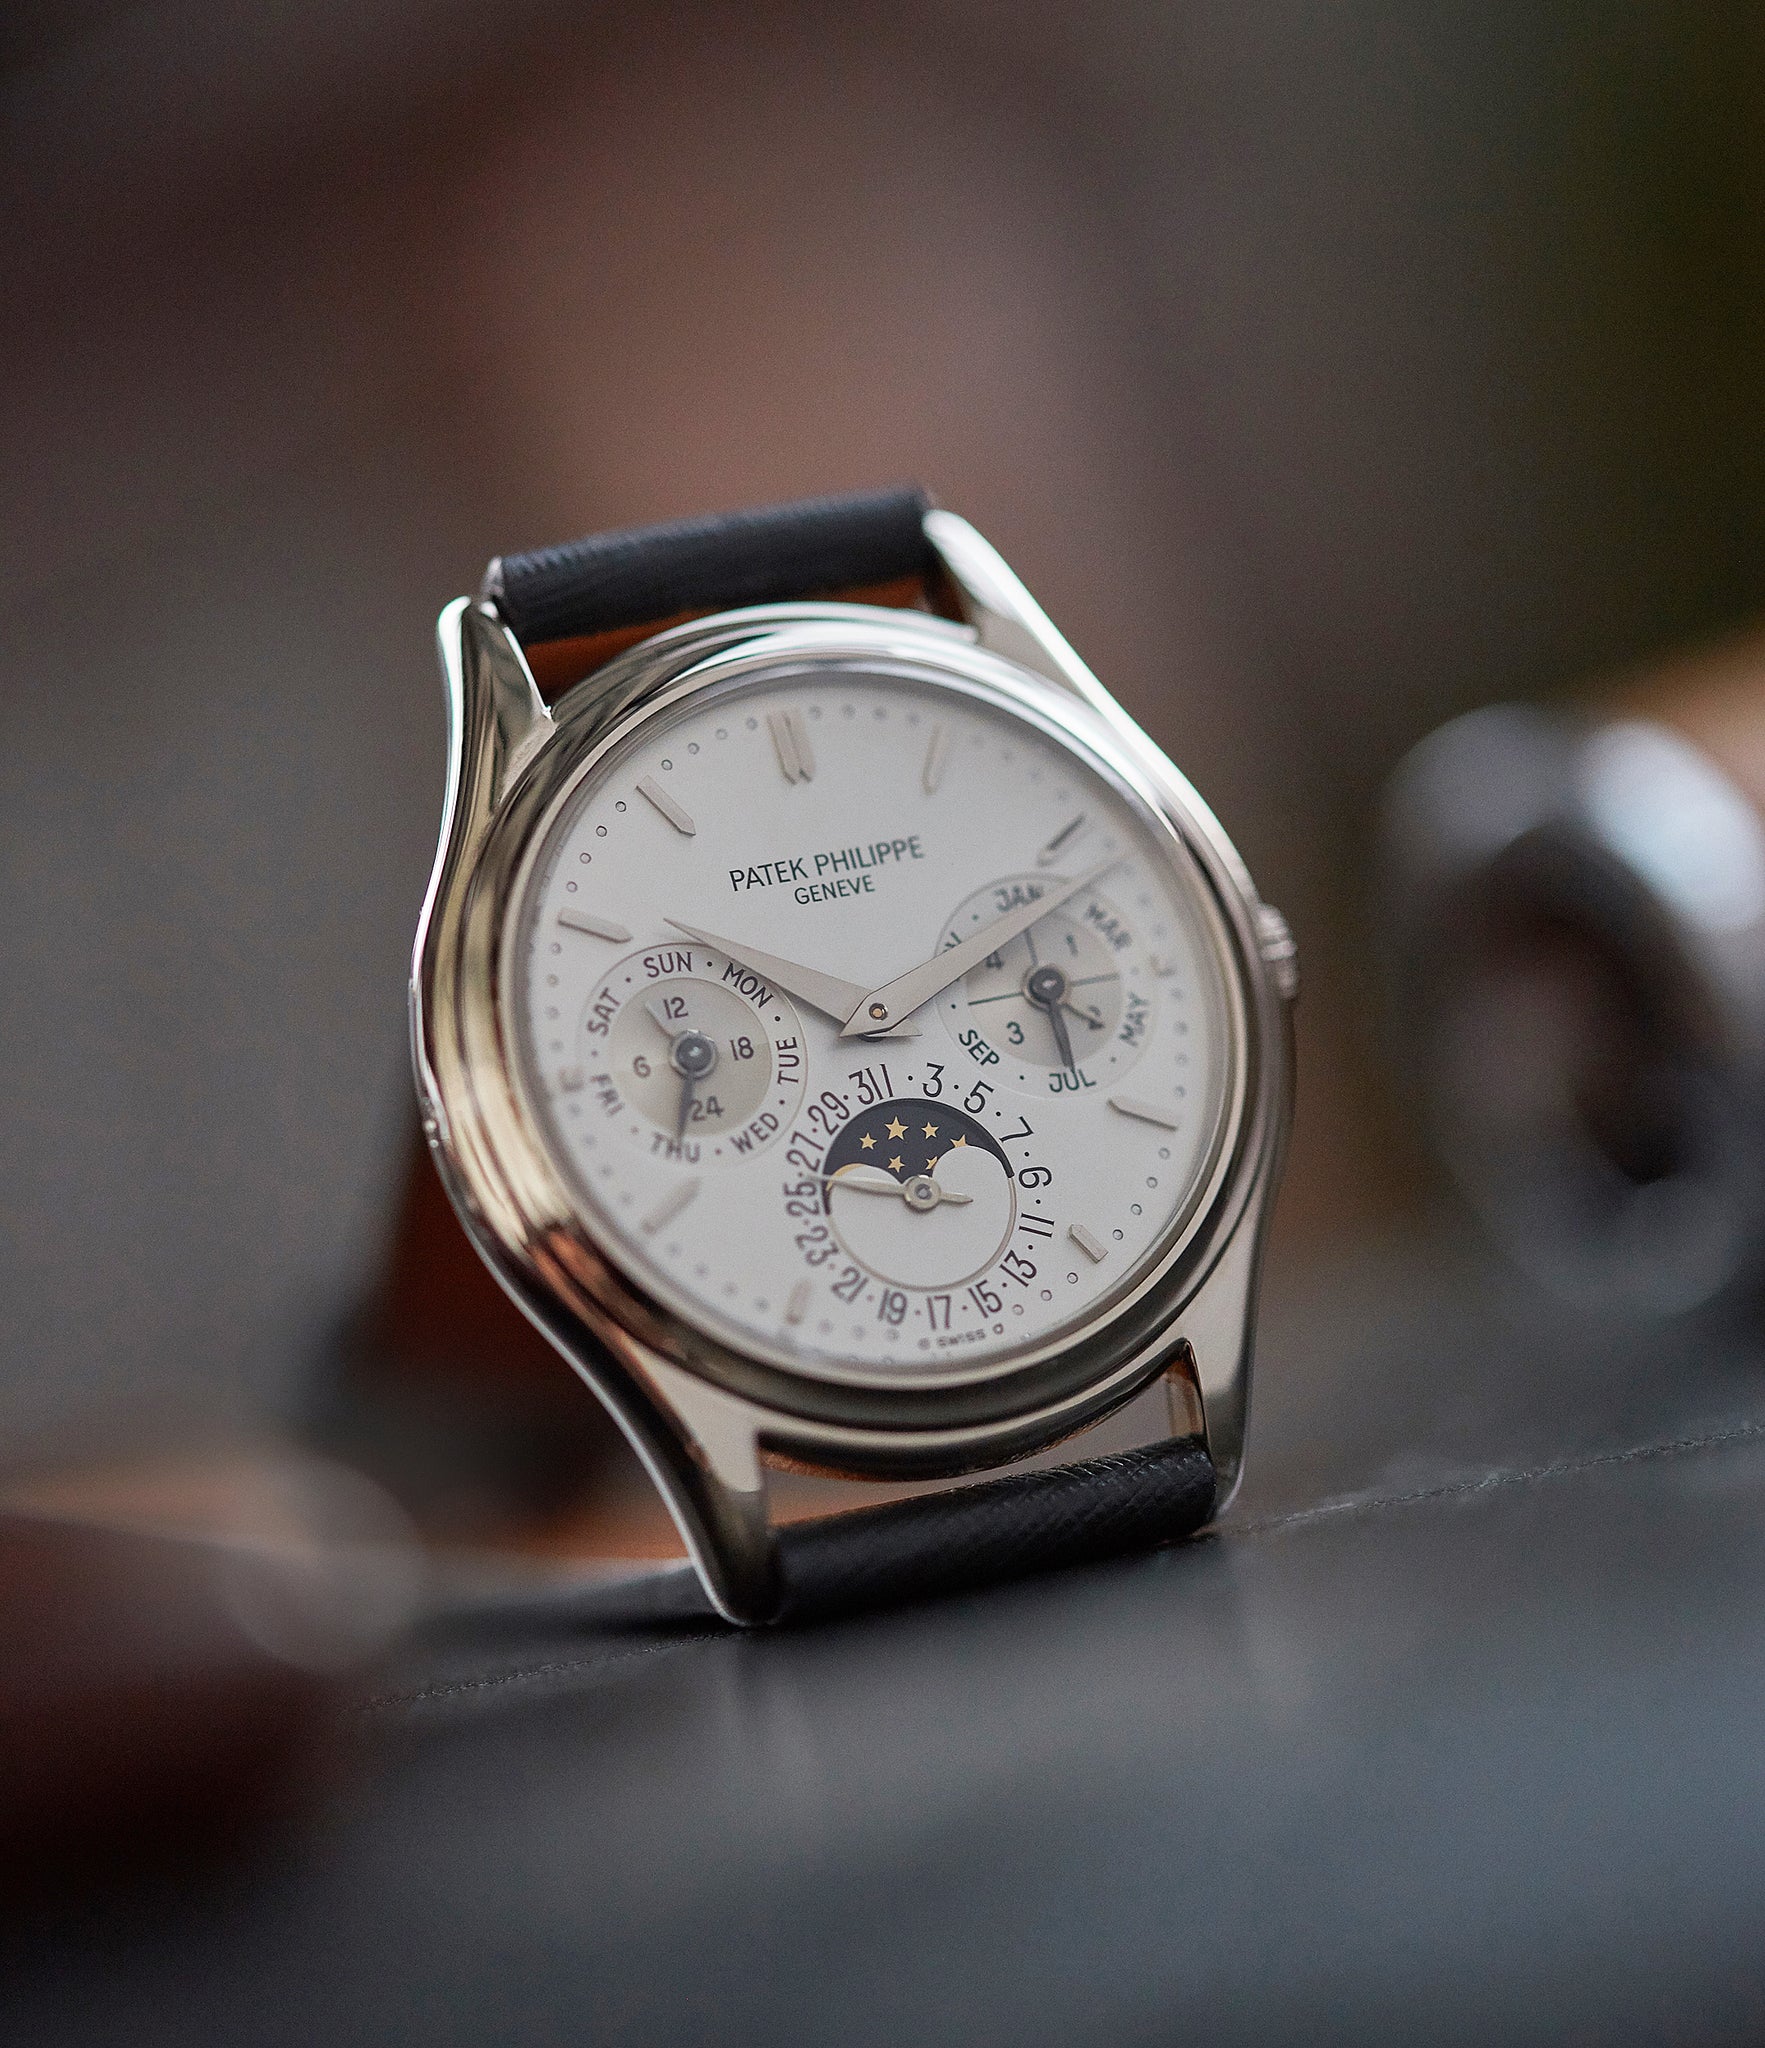 buy vintage Patek Philippe 3940G Perpetual Calendar vintage rare watch English dial for sale online at A Collected Man London UK specialist of rare watches